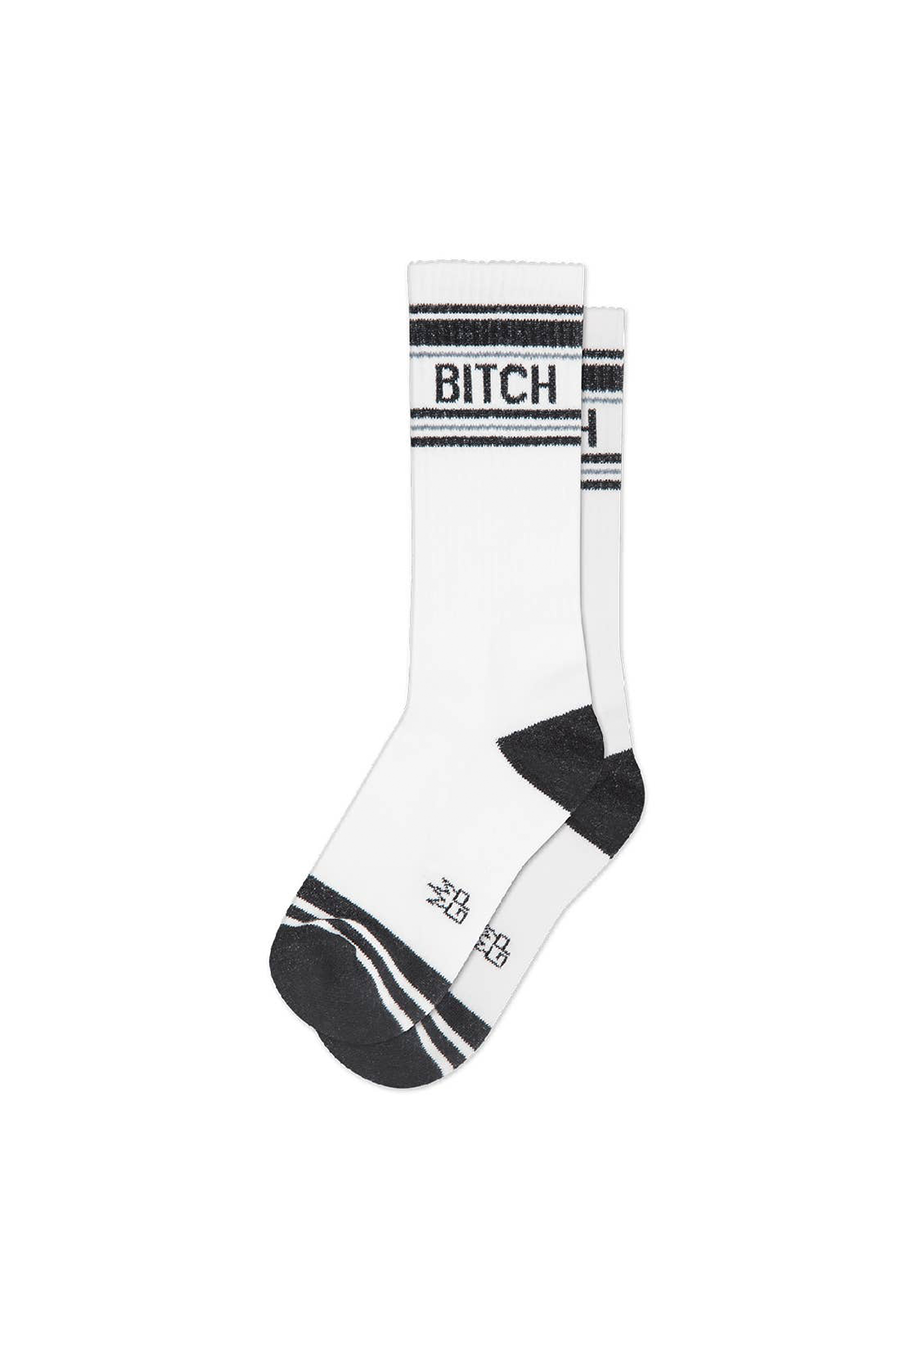 Bitch Ribbed Gym Sock - Main Image Number 1 of 1